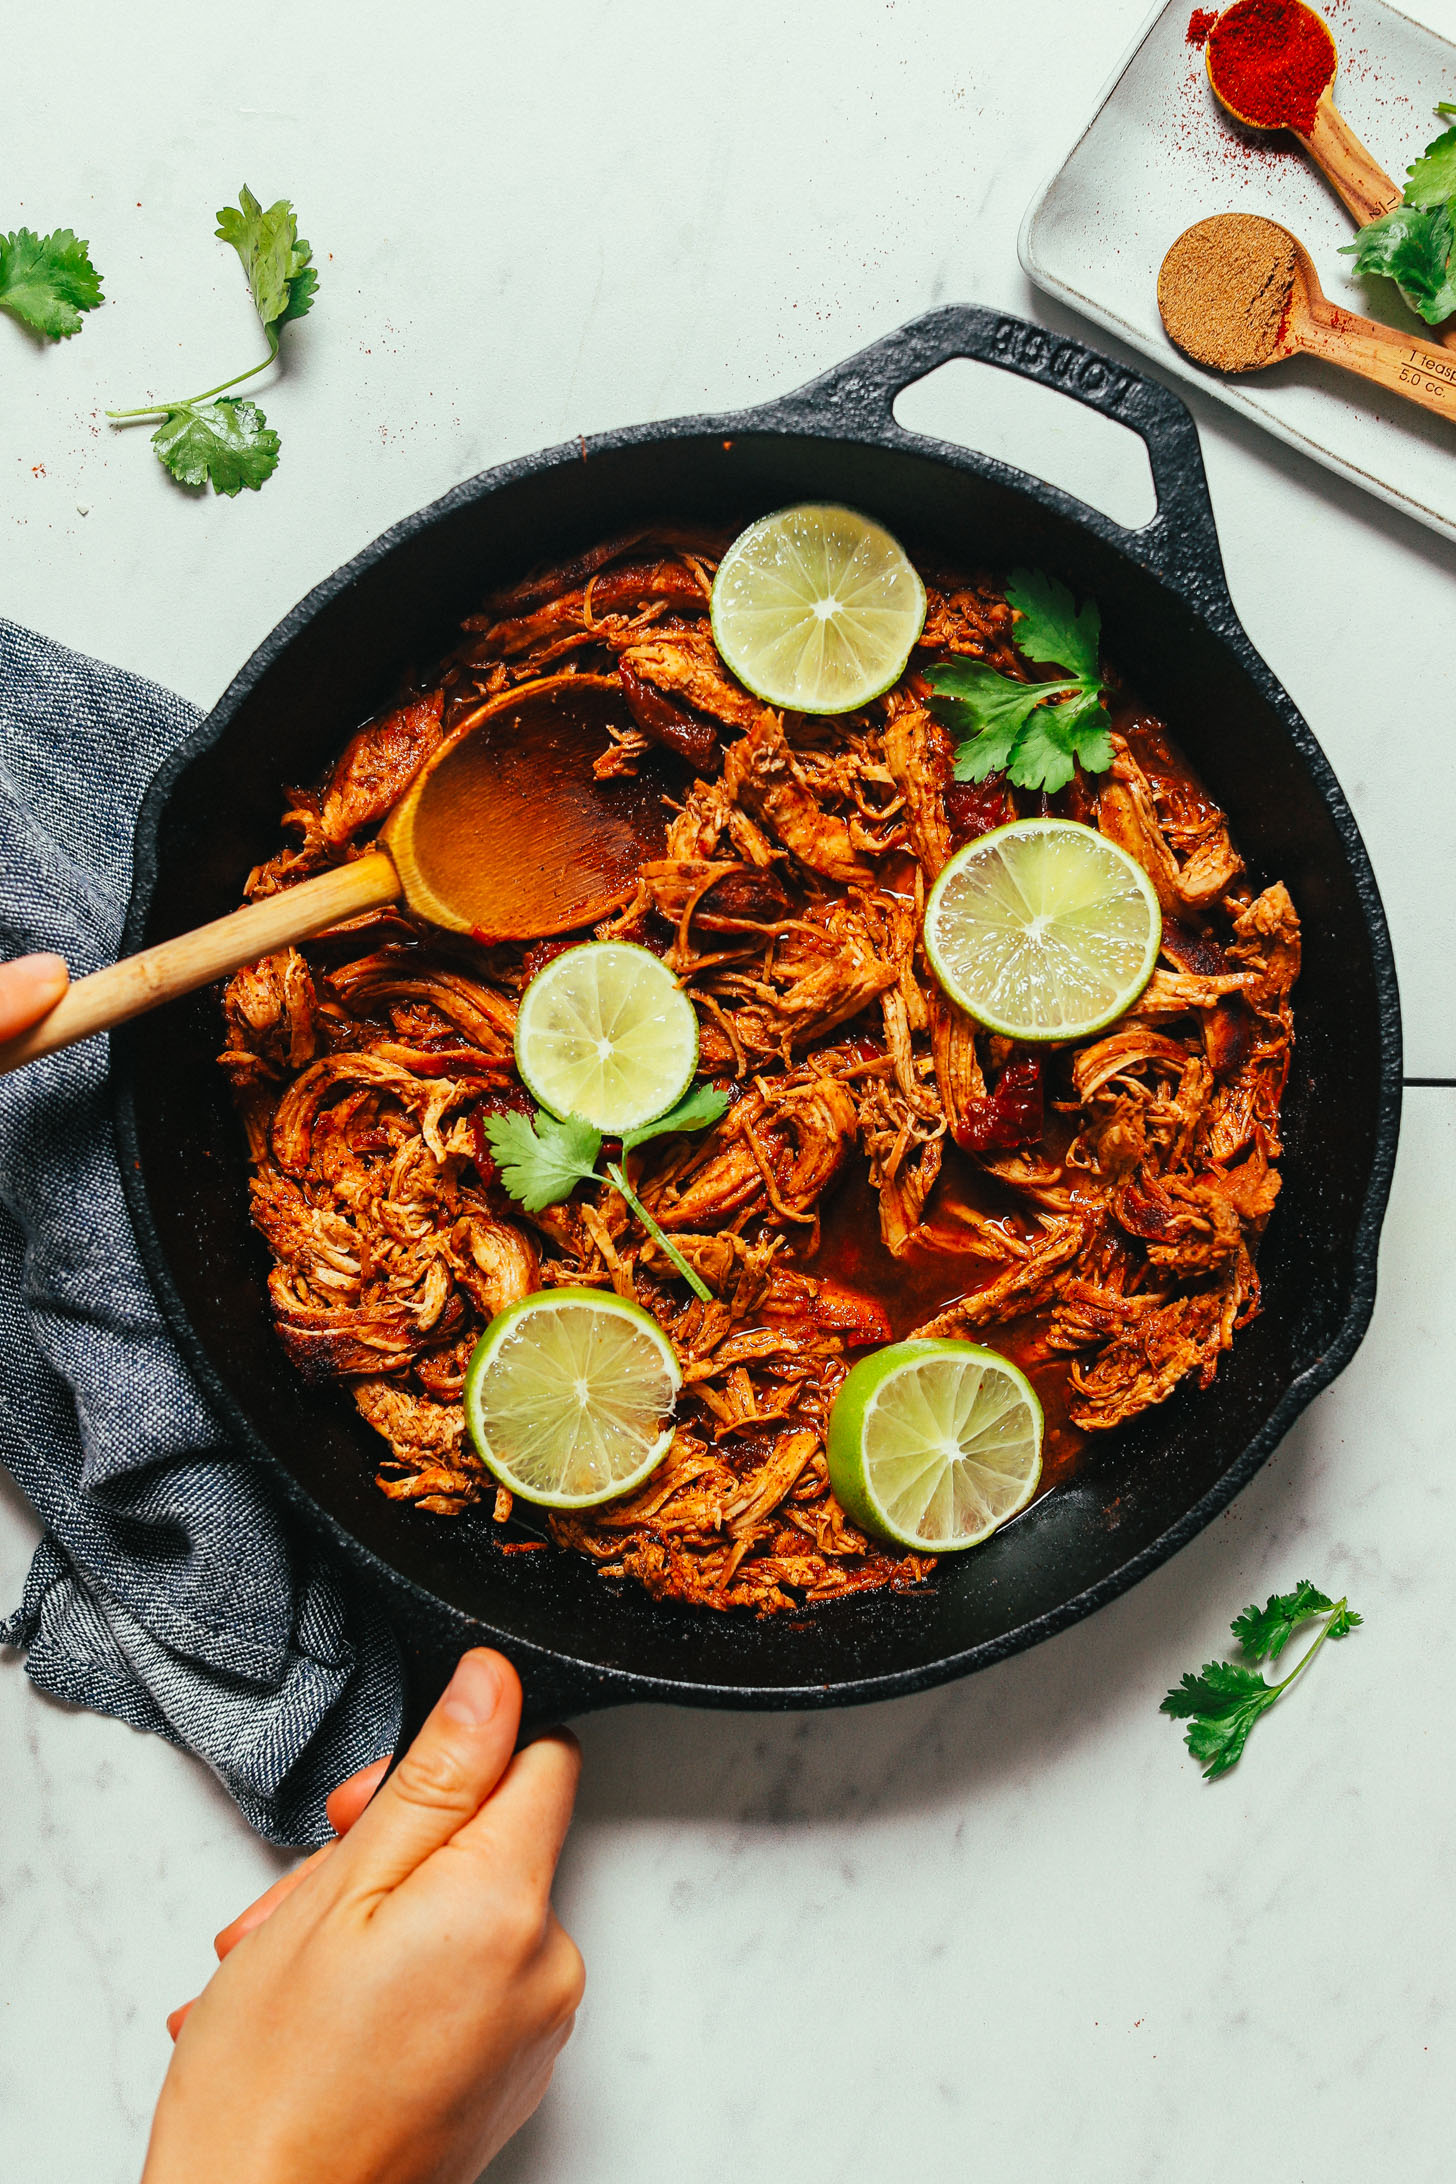 Large cast iron skillet filled with a batch of our Mexican Shredded Chicken recipe